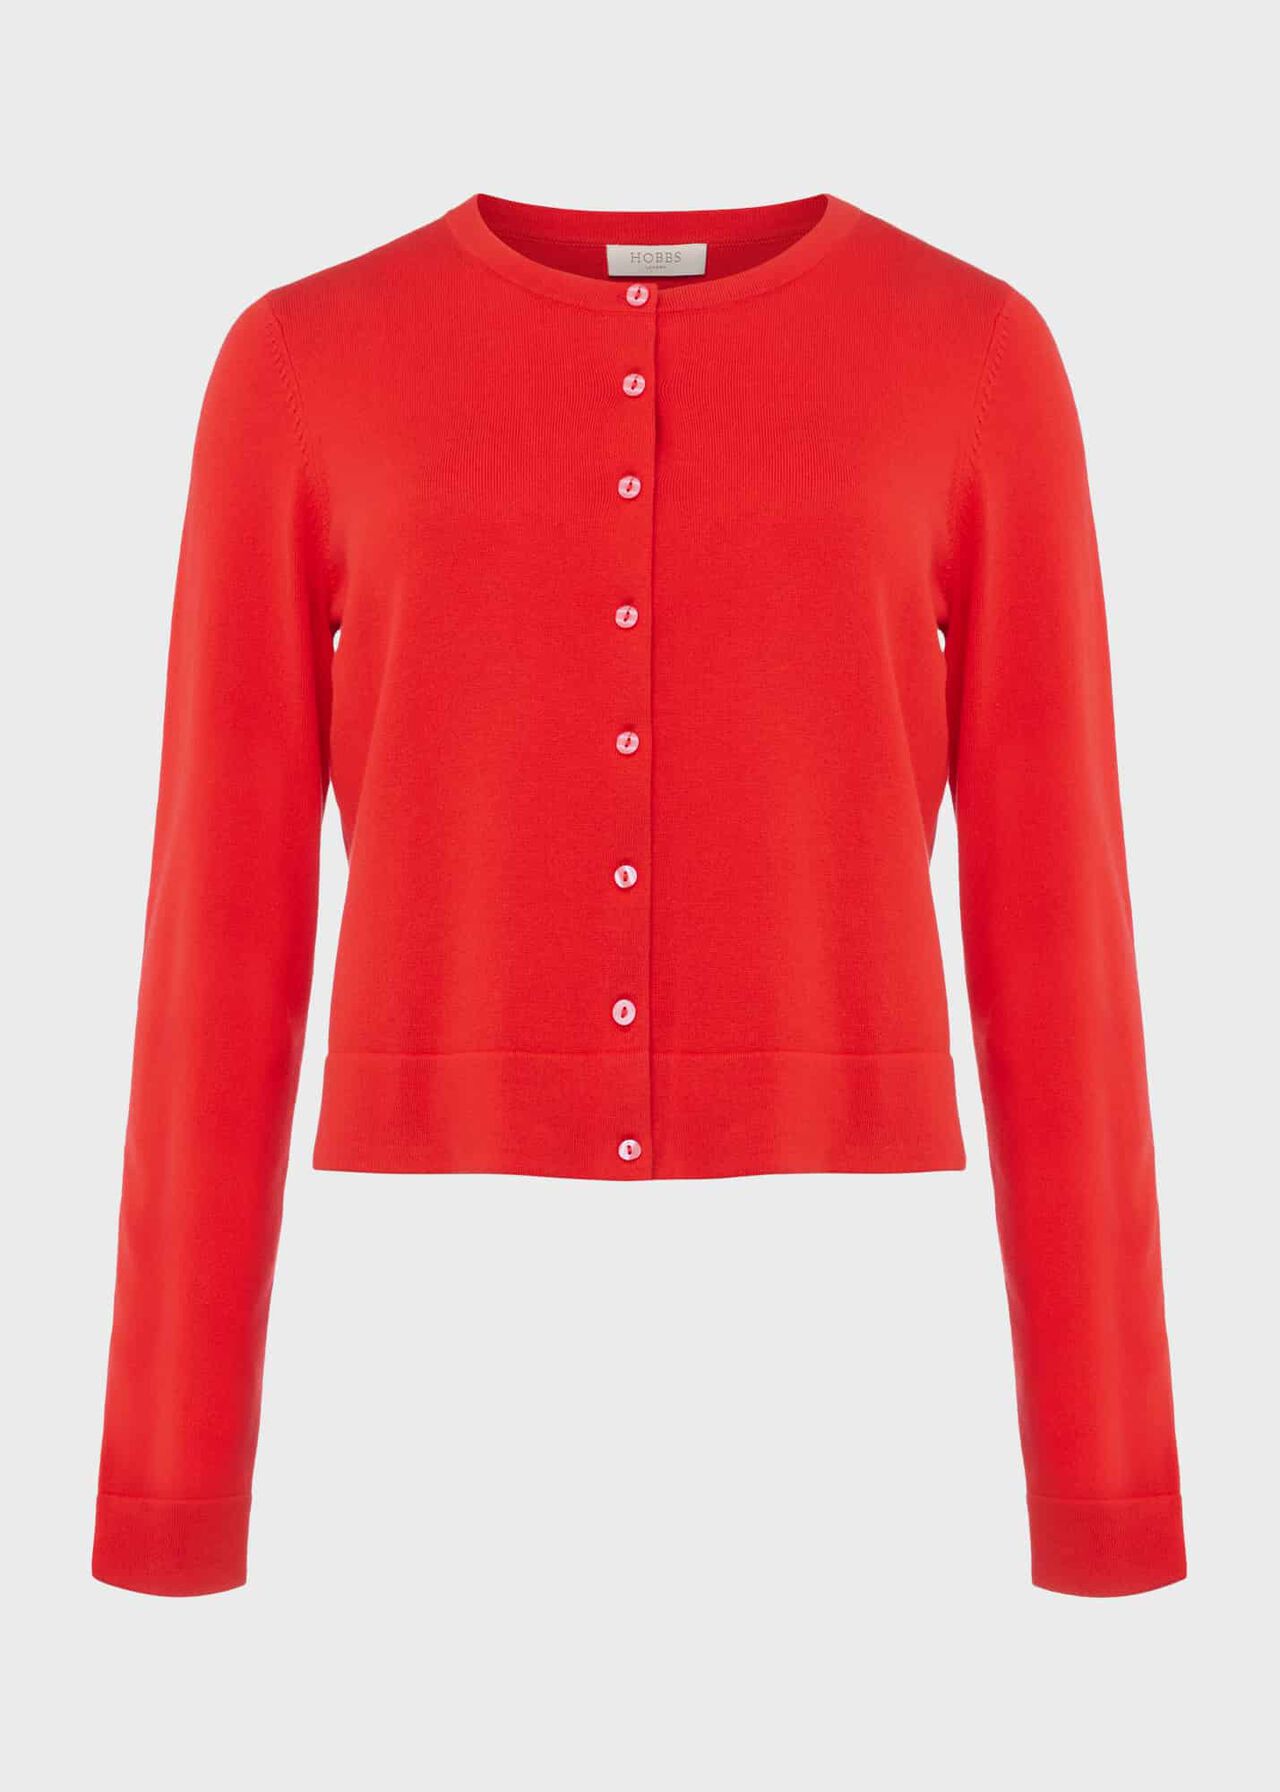 Michelle Cotton Cardigan, Coral Red, hi-res